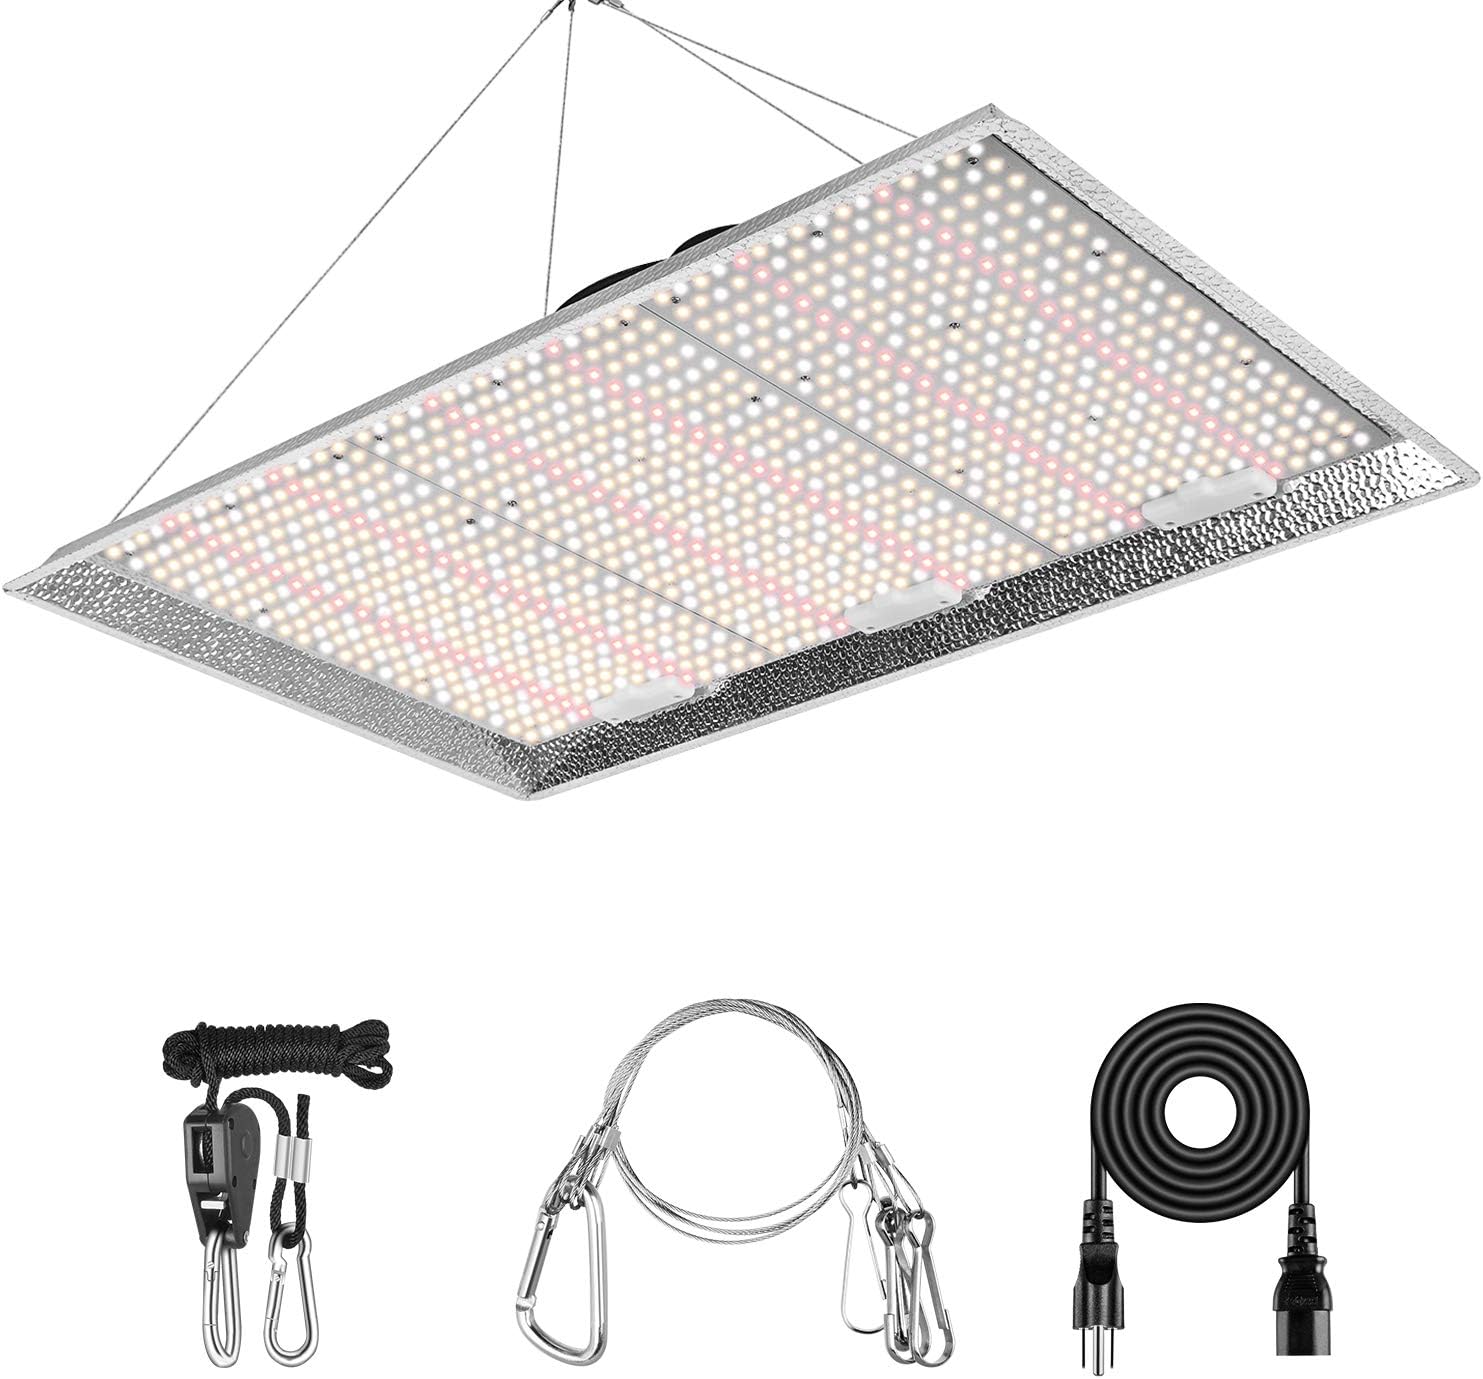 iPower AL 4500W LED Grow Light Daisy Chain Dimmable Full Spectrum for Hydroponic Indoor Plants Seeding Veg and Bloom in Greenhouse Tent, 4x4ft 5x5ft Coverage